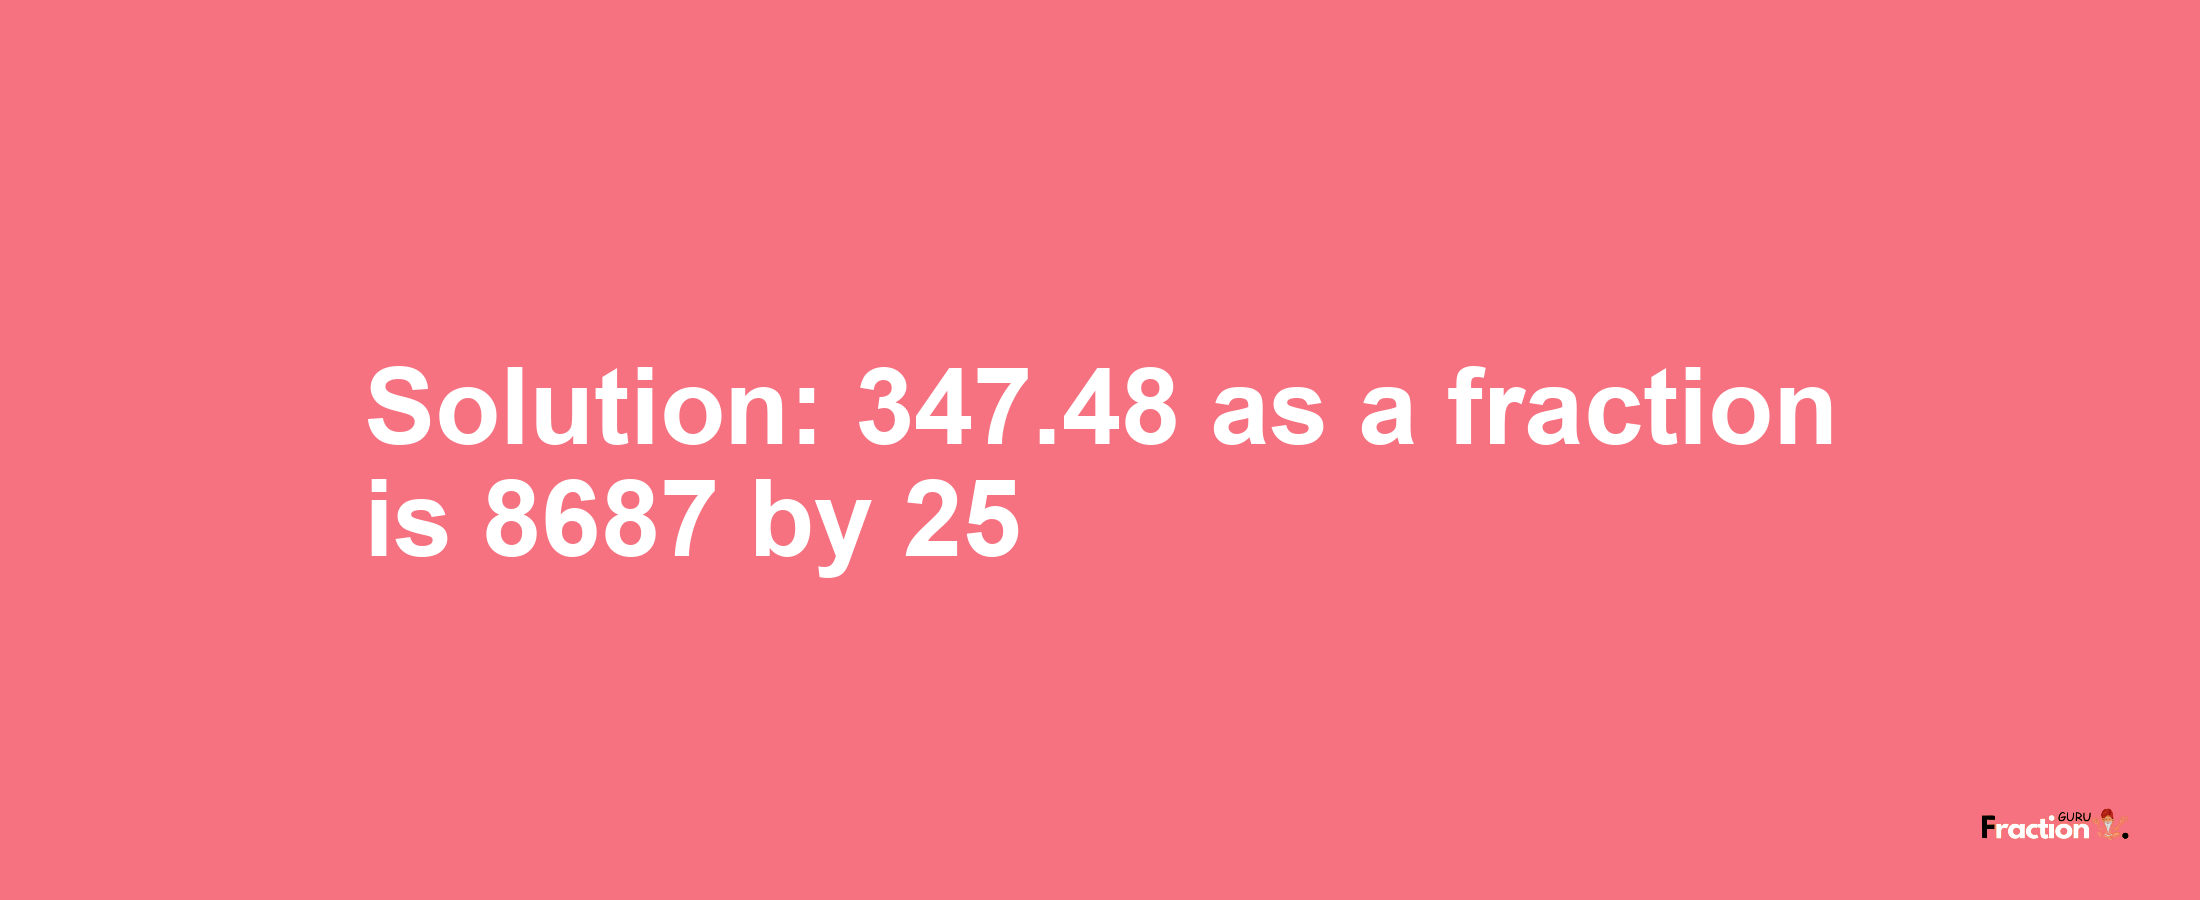 Solution:347.48 as a fraction is 8687/25